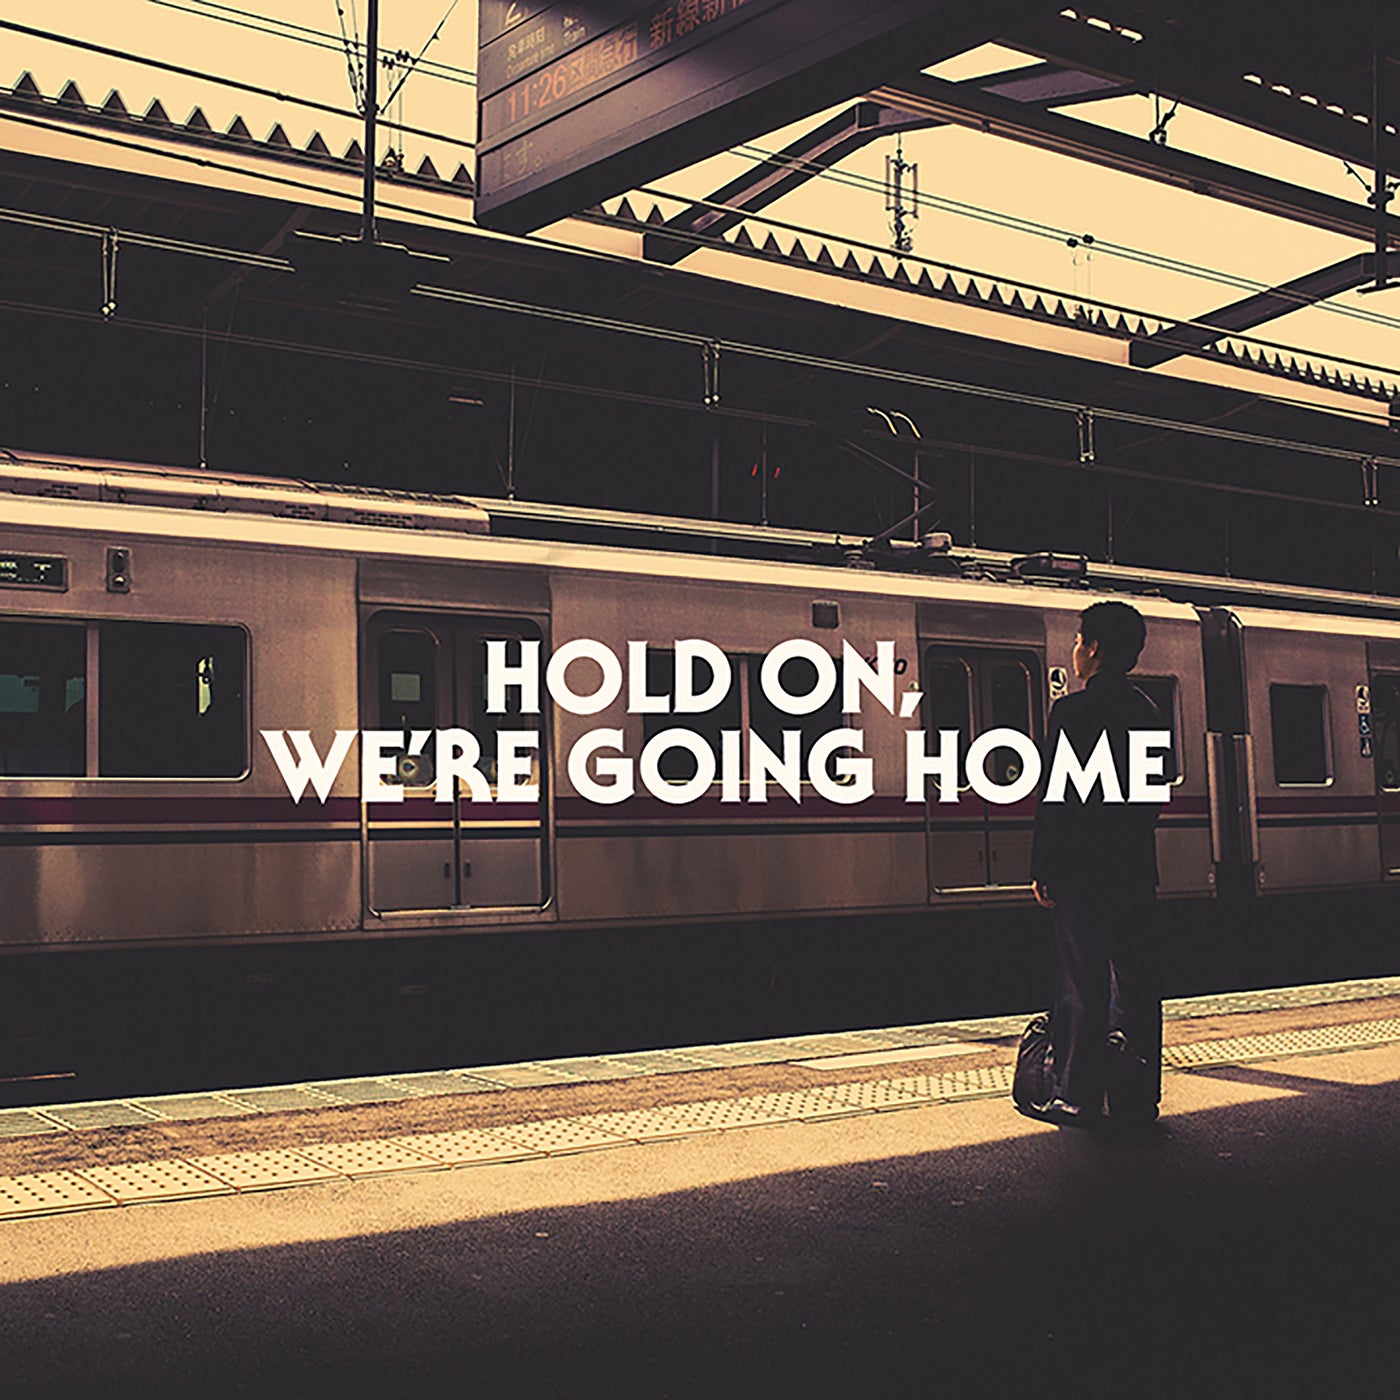 3 never going home. Go Home. Going Home. Hold on we’re going Home. Go Home картинка.